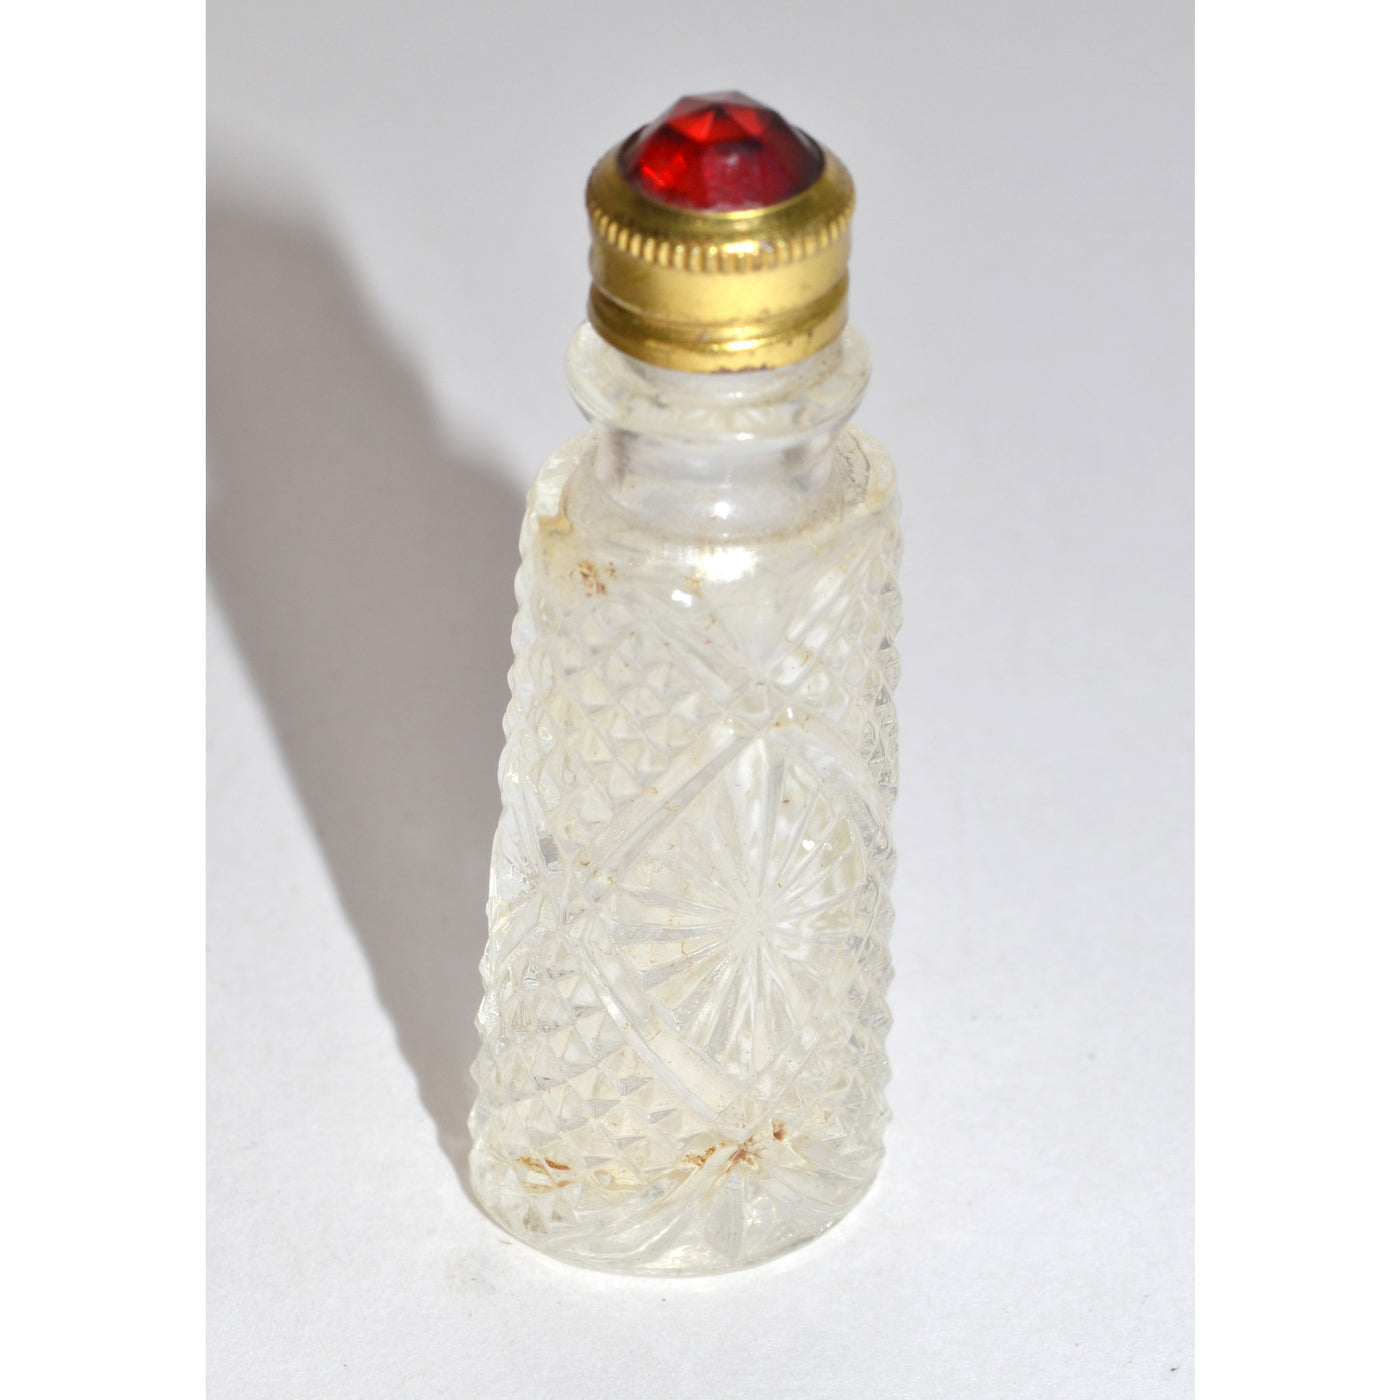 Vintage Red Jeweled Top Perfume Purse Bottle